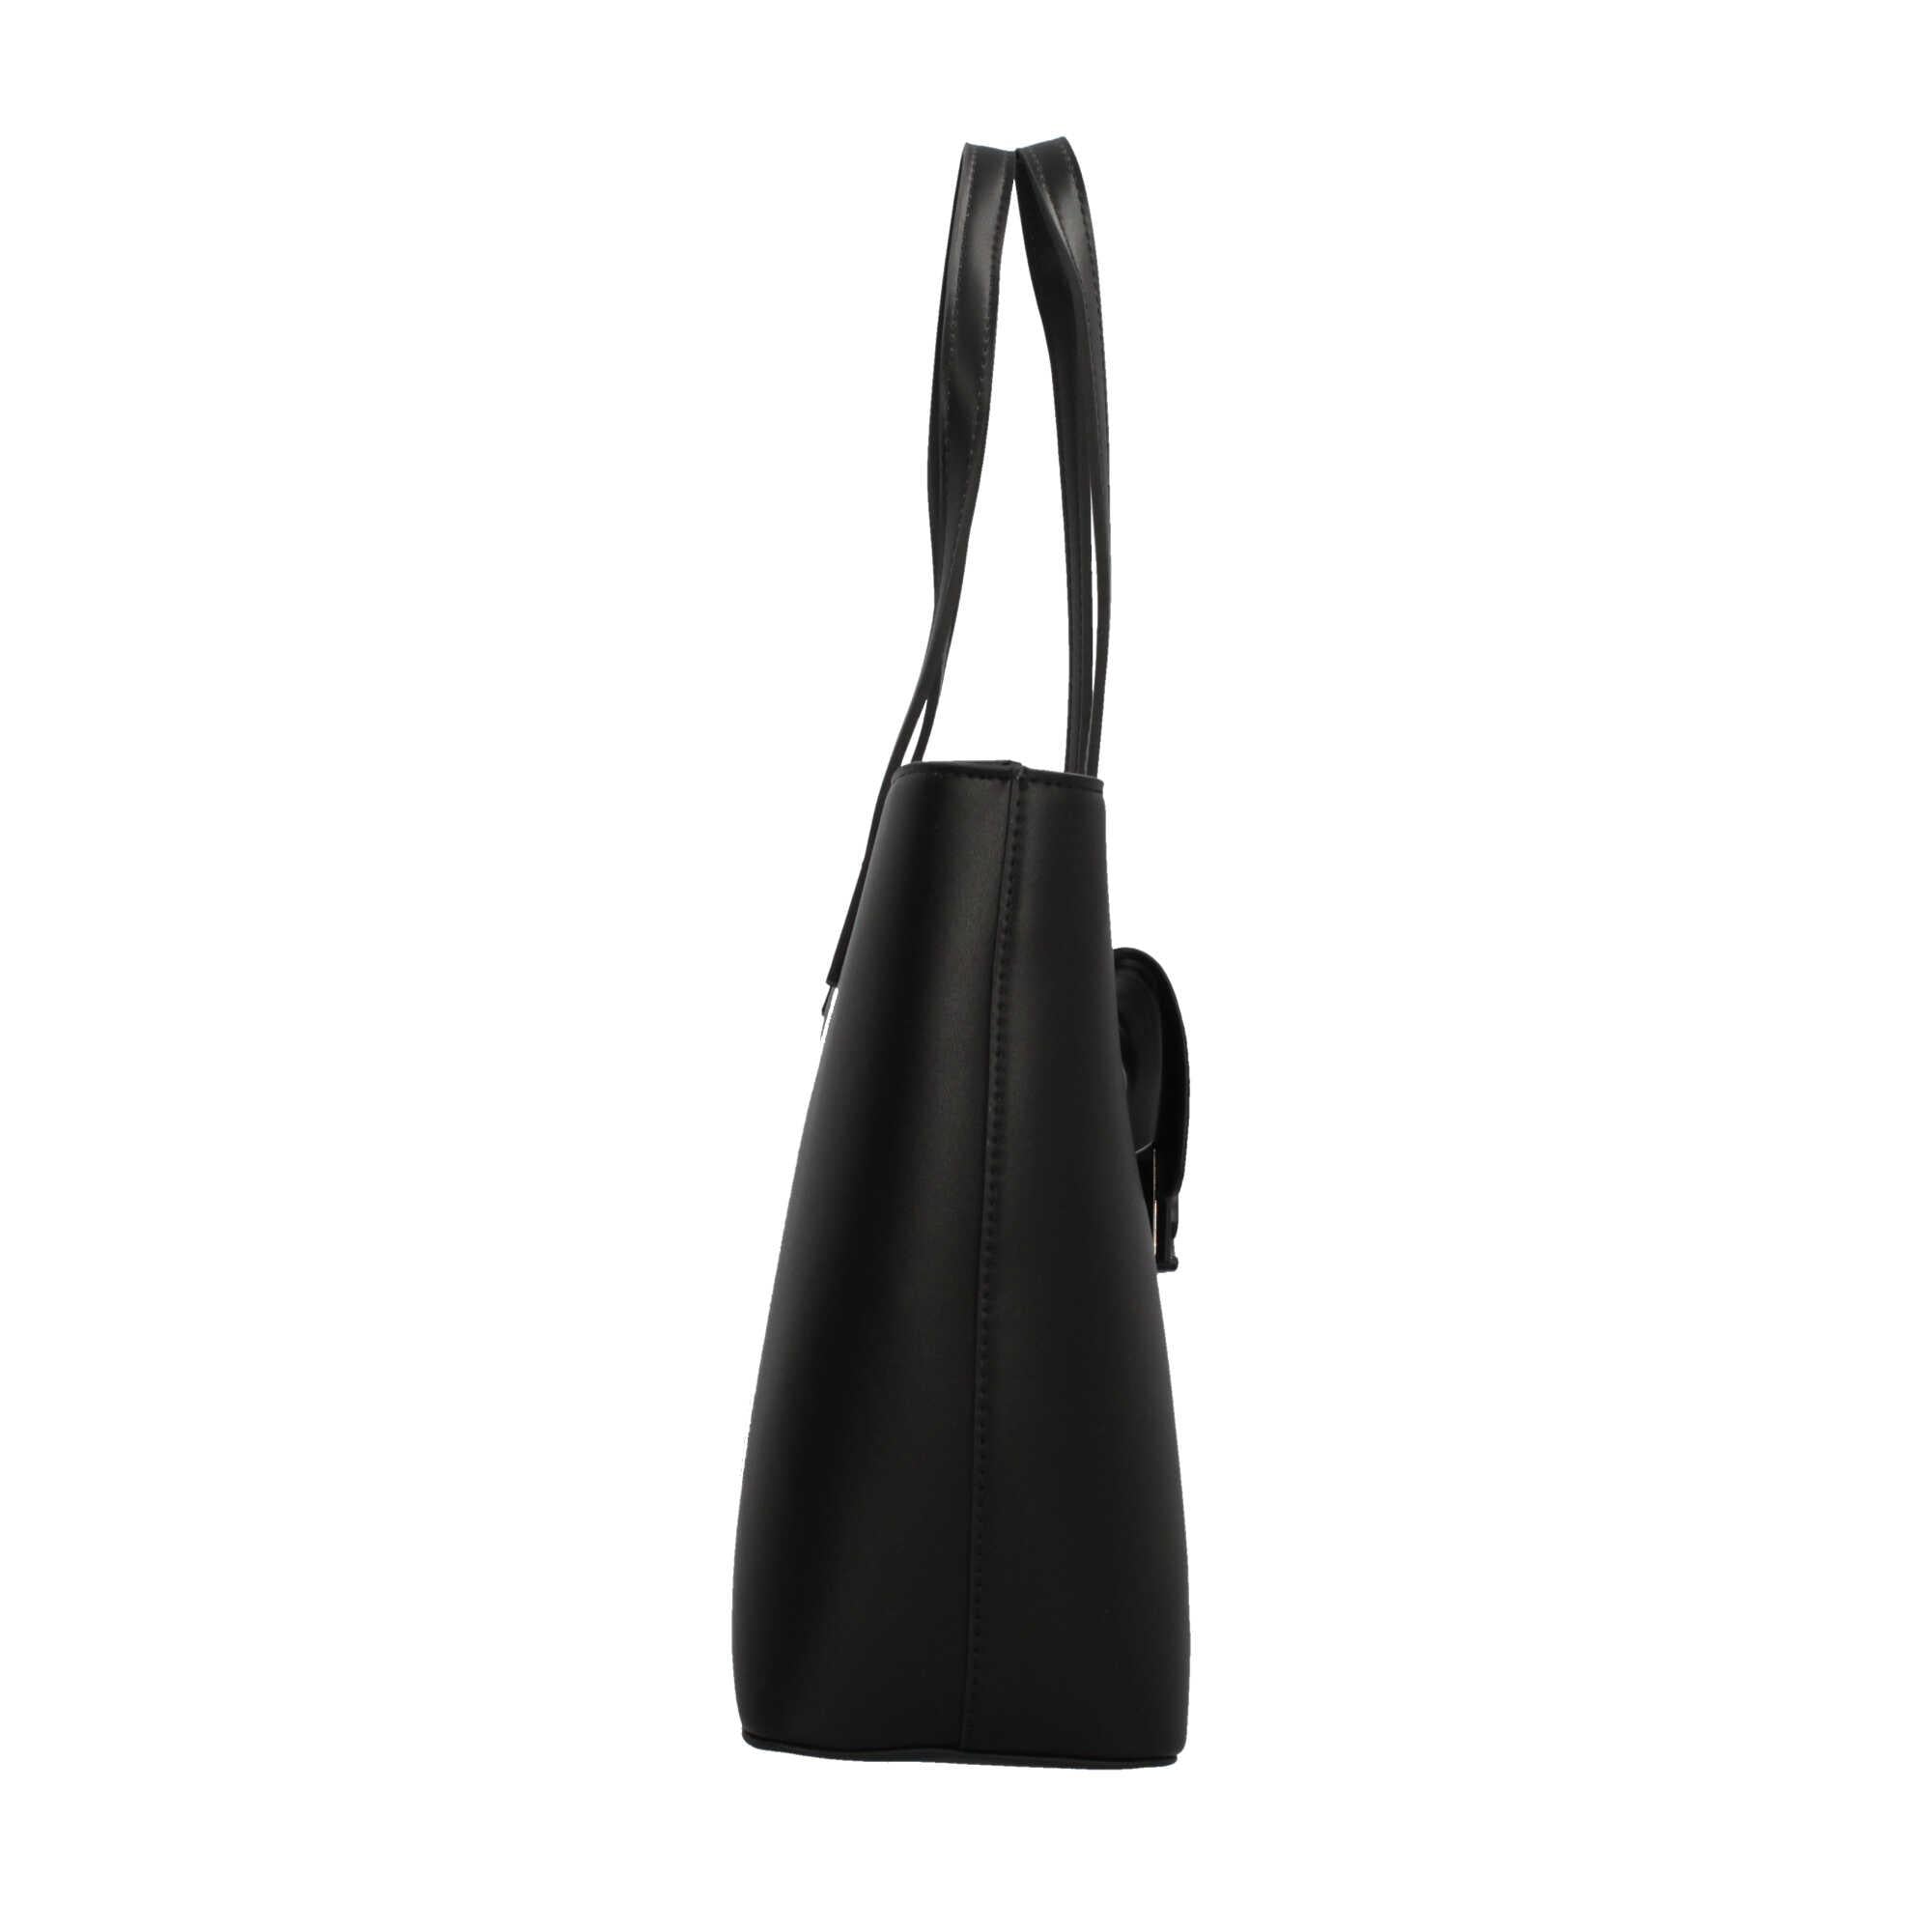 Y Not? Tote Bag Urban Chic in Ecopelle